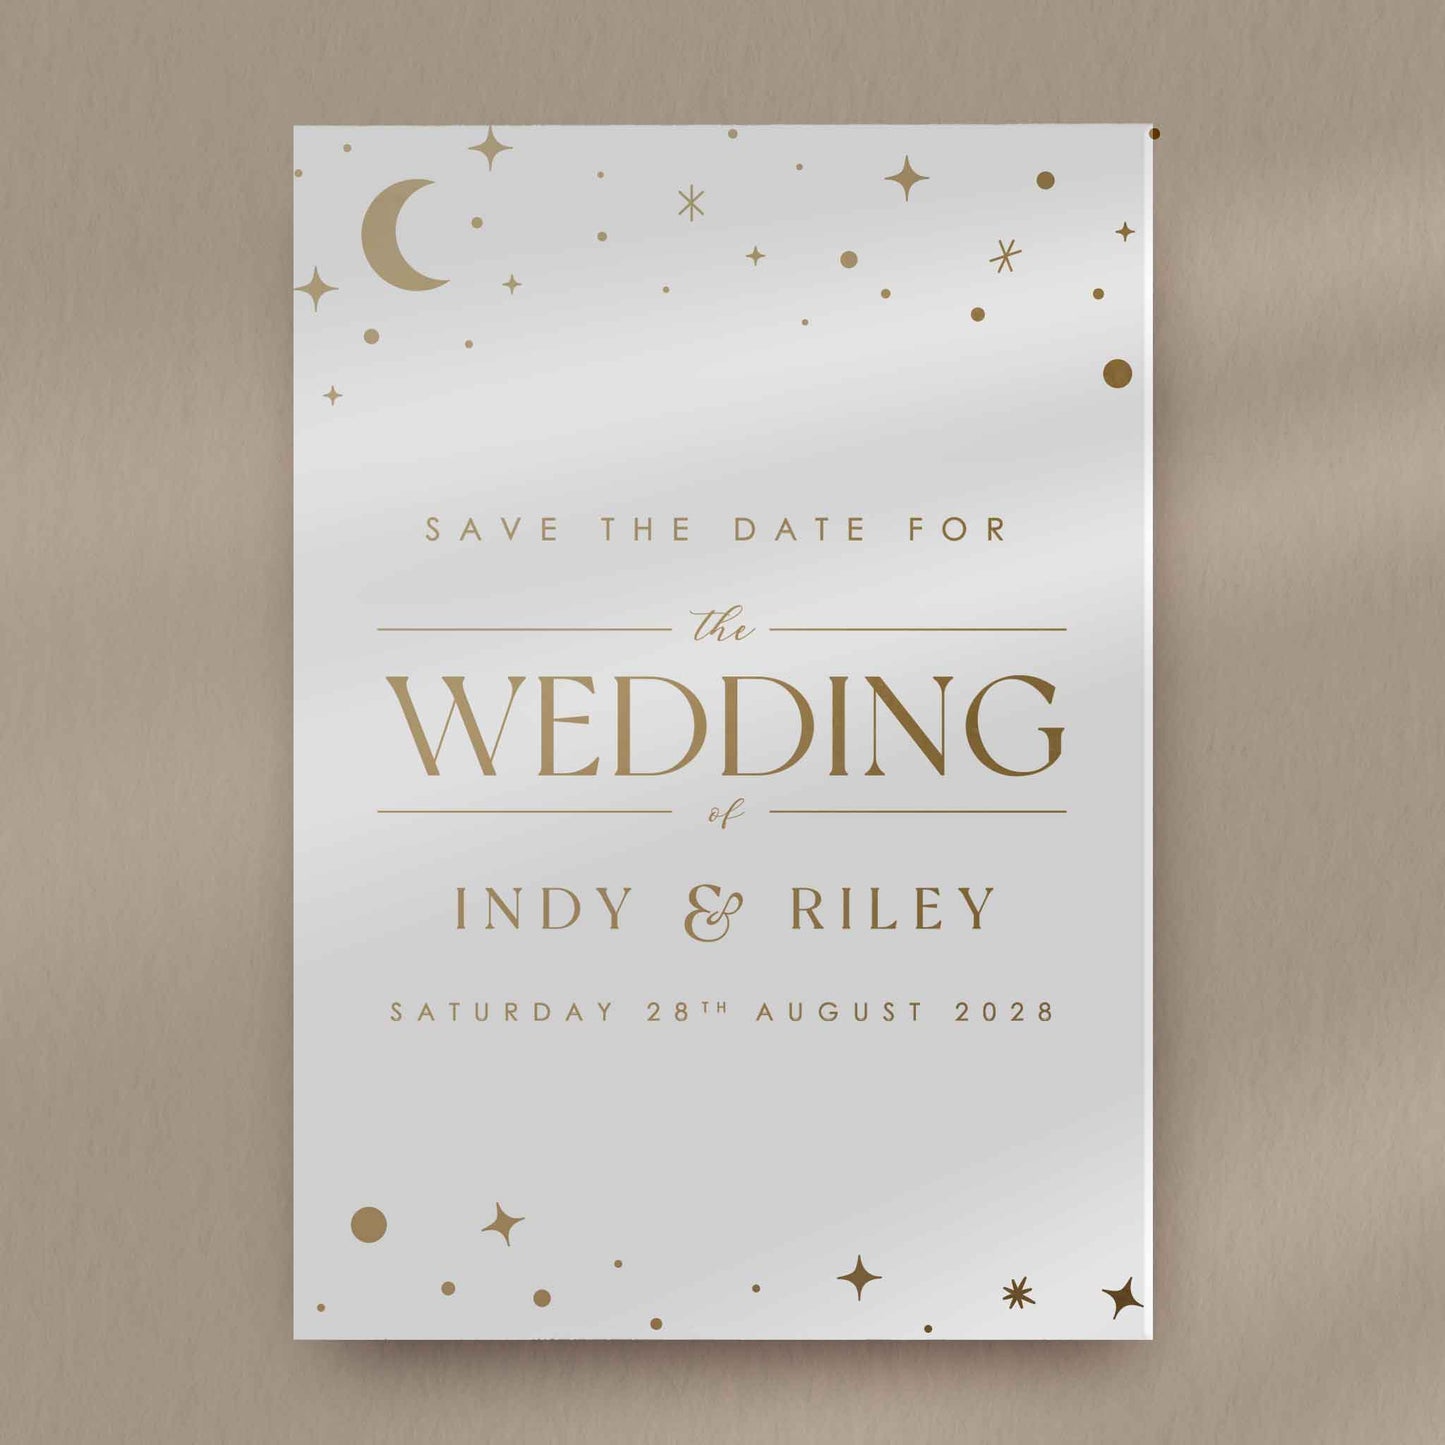 Save The Date Sample  Ivy and Gold Wedding Stationery Indy  